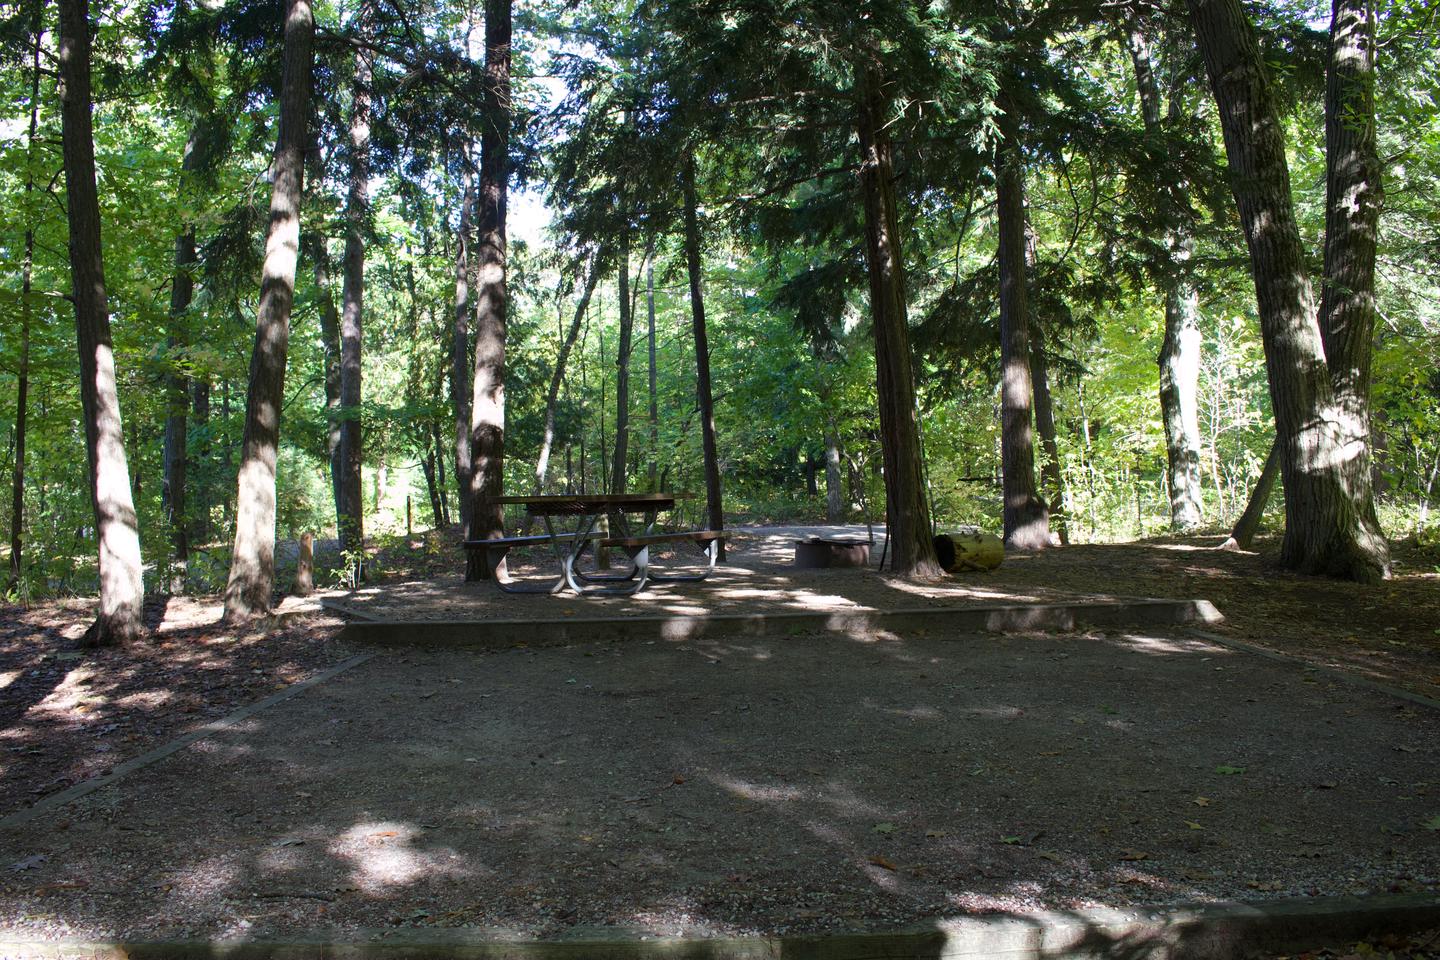 Campsite #75, view from the tent pad toward the site